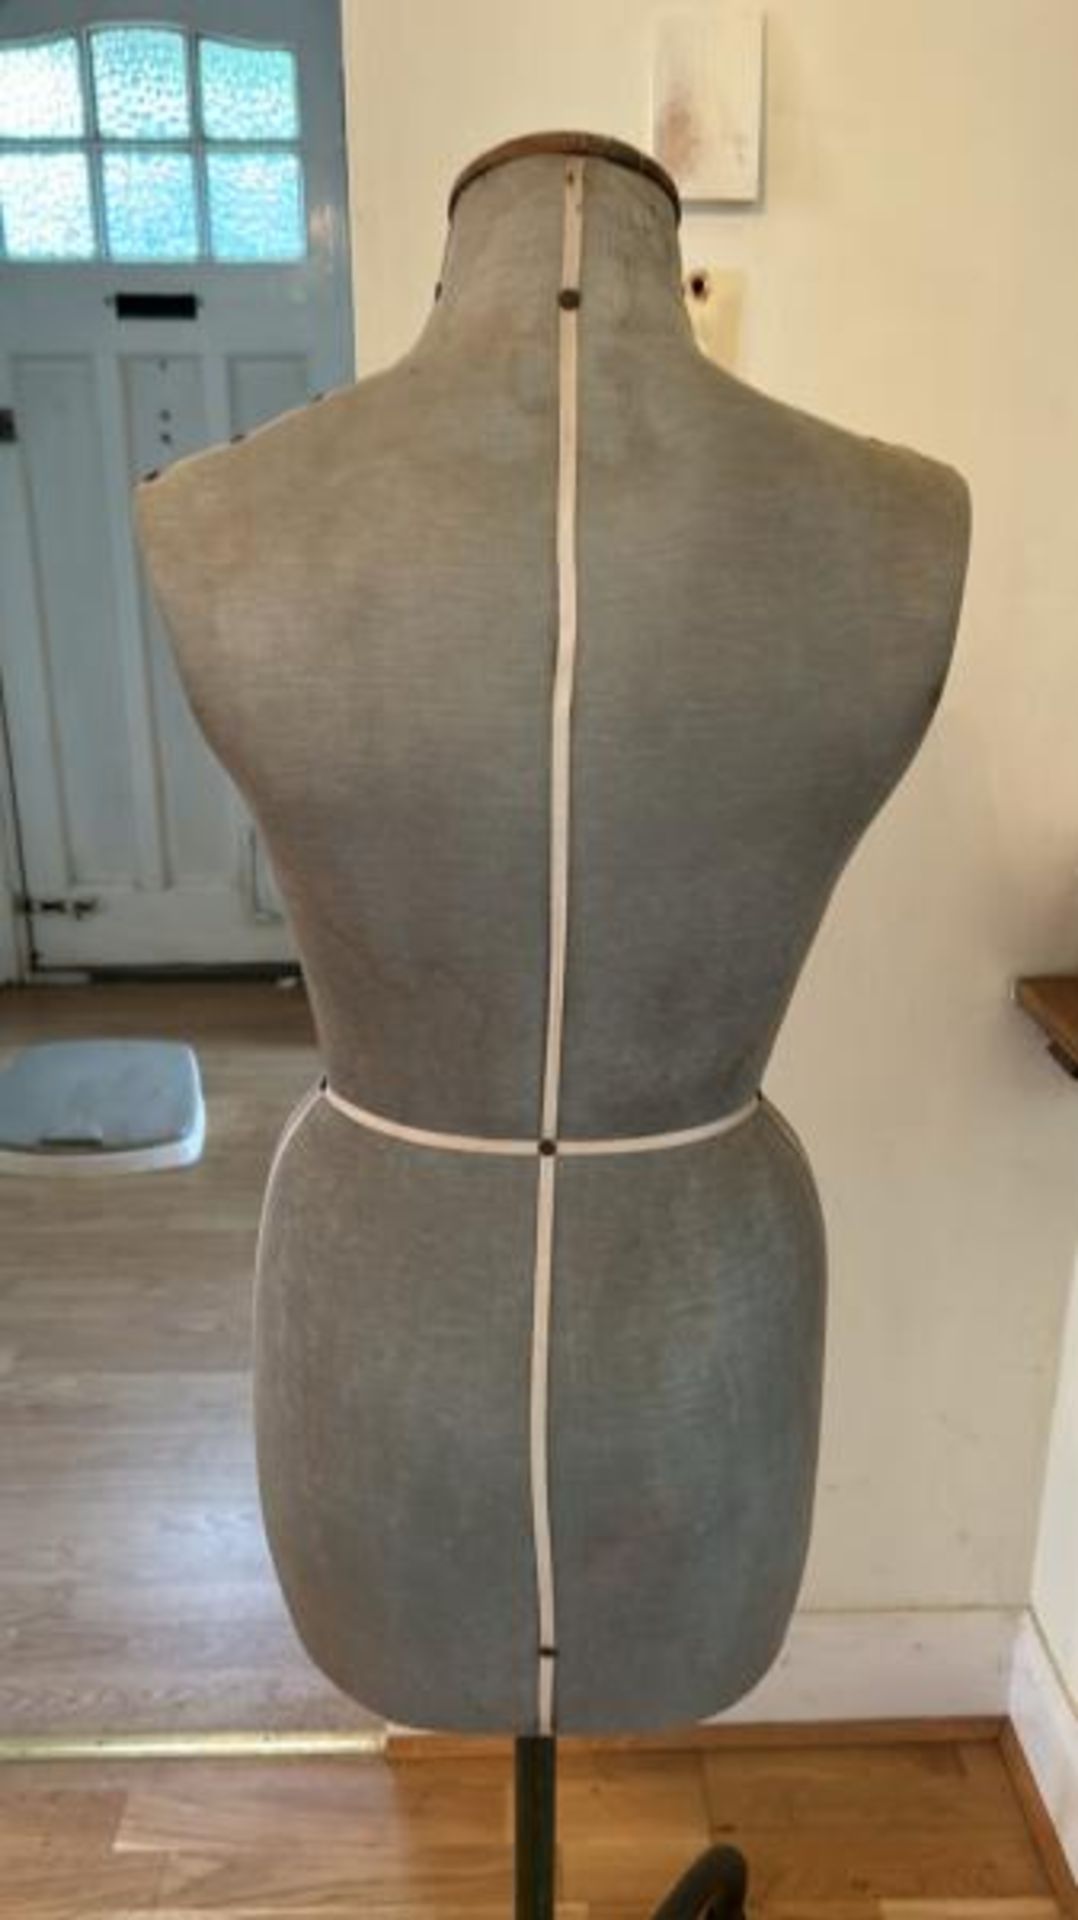 Vintage Singer dress makers mannequin (collection from private residence in Weybridge, Surrey) - Image 5 of 6